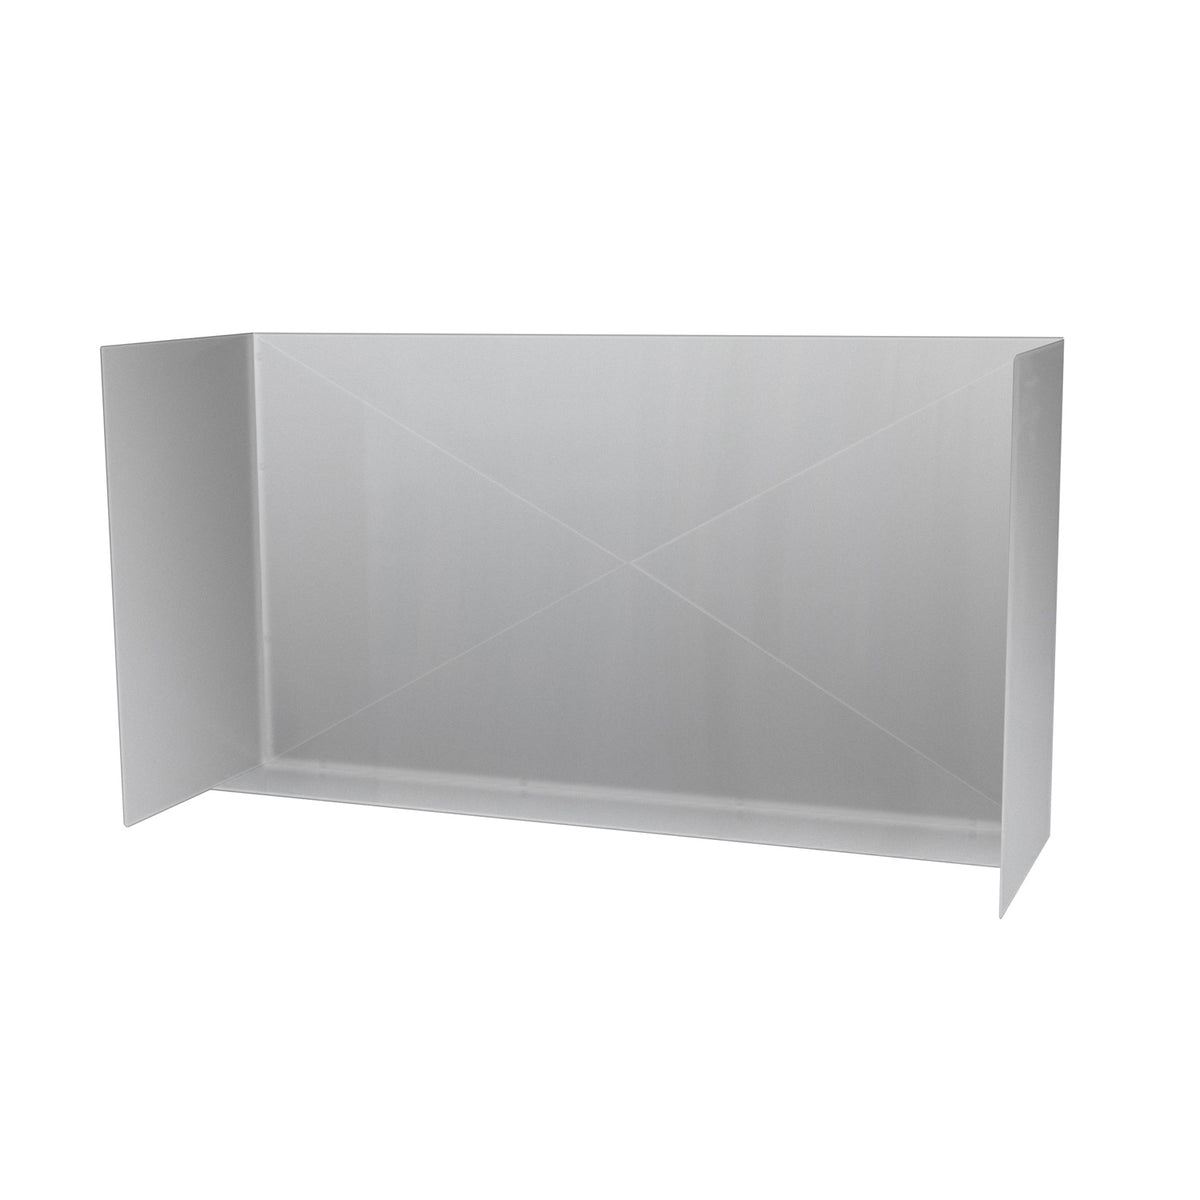 48" Stainless Steel Wind Guard